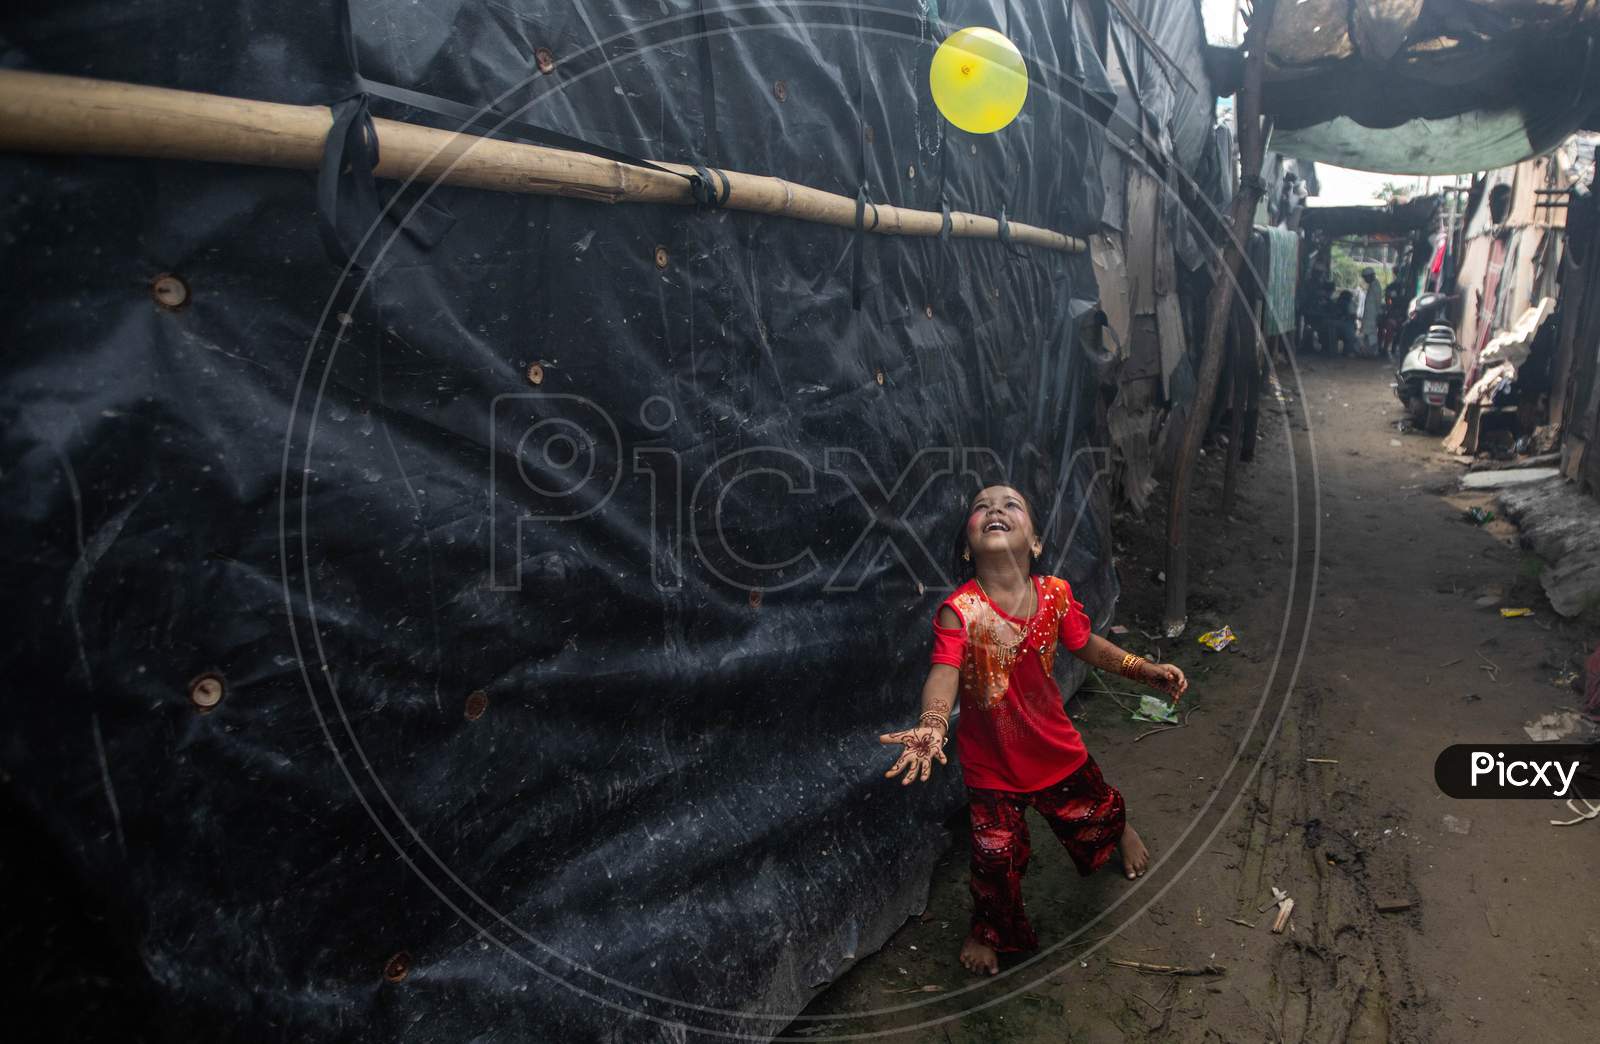 A Rohingya refugee girl plays as she wears new clothes and make up during Eid Al-Adha (Feast of Sacrifice) festival at a camp in the outskirts of New Delhi, India on August 1, 2020.